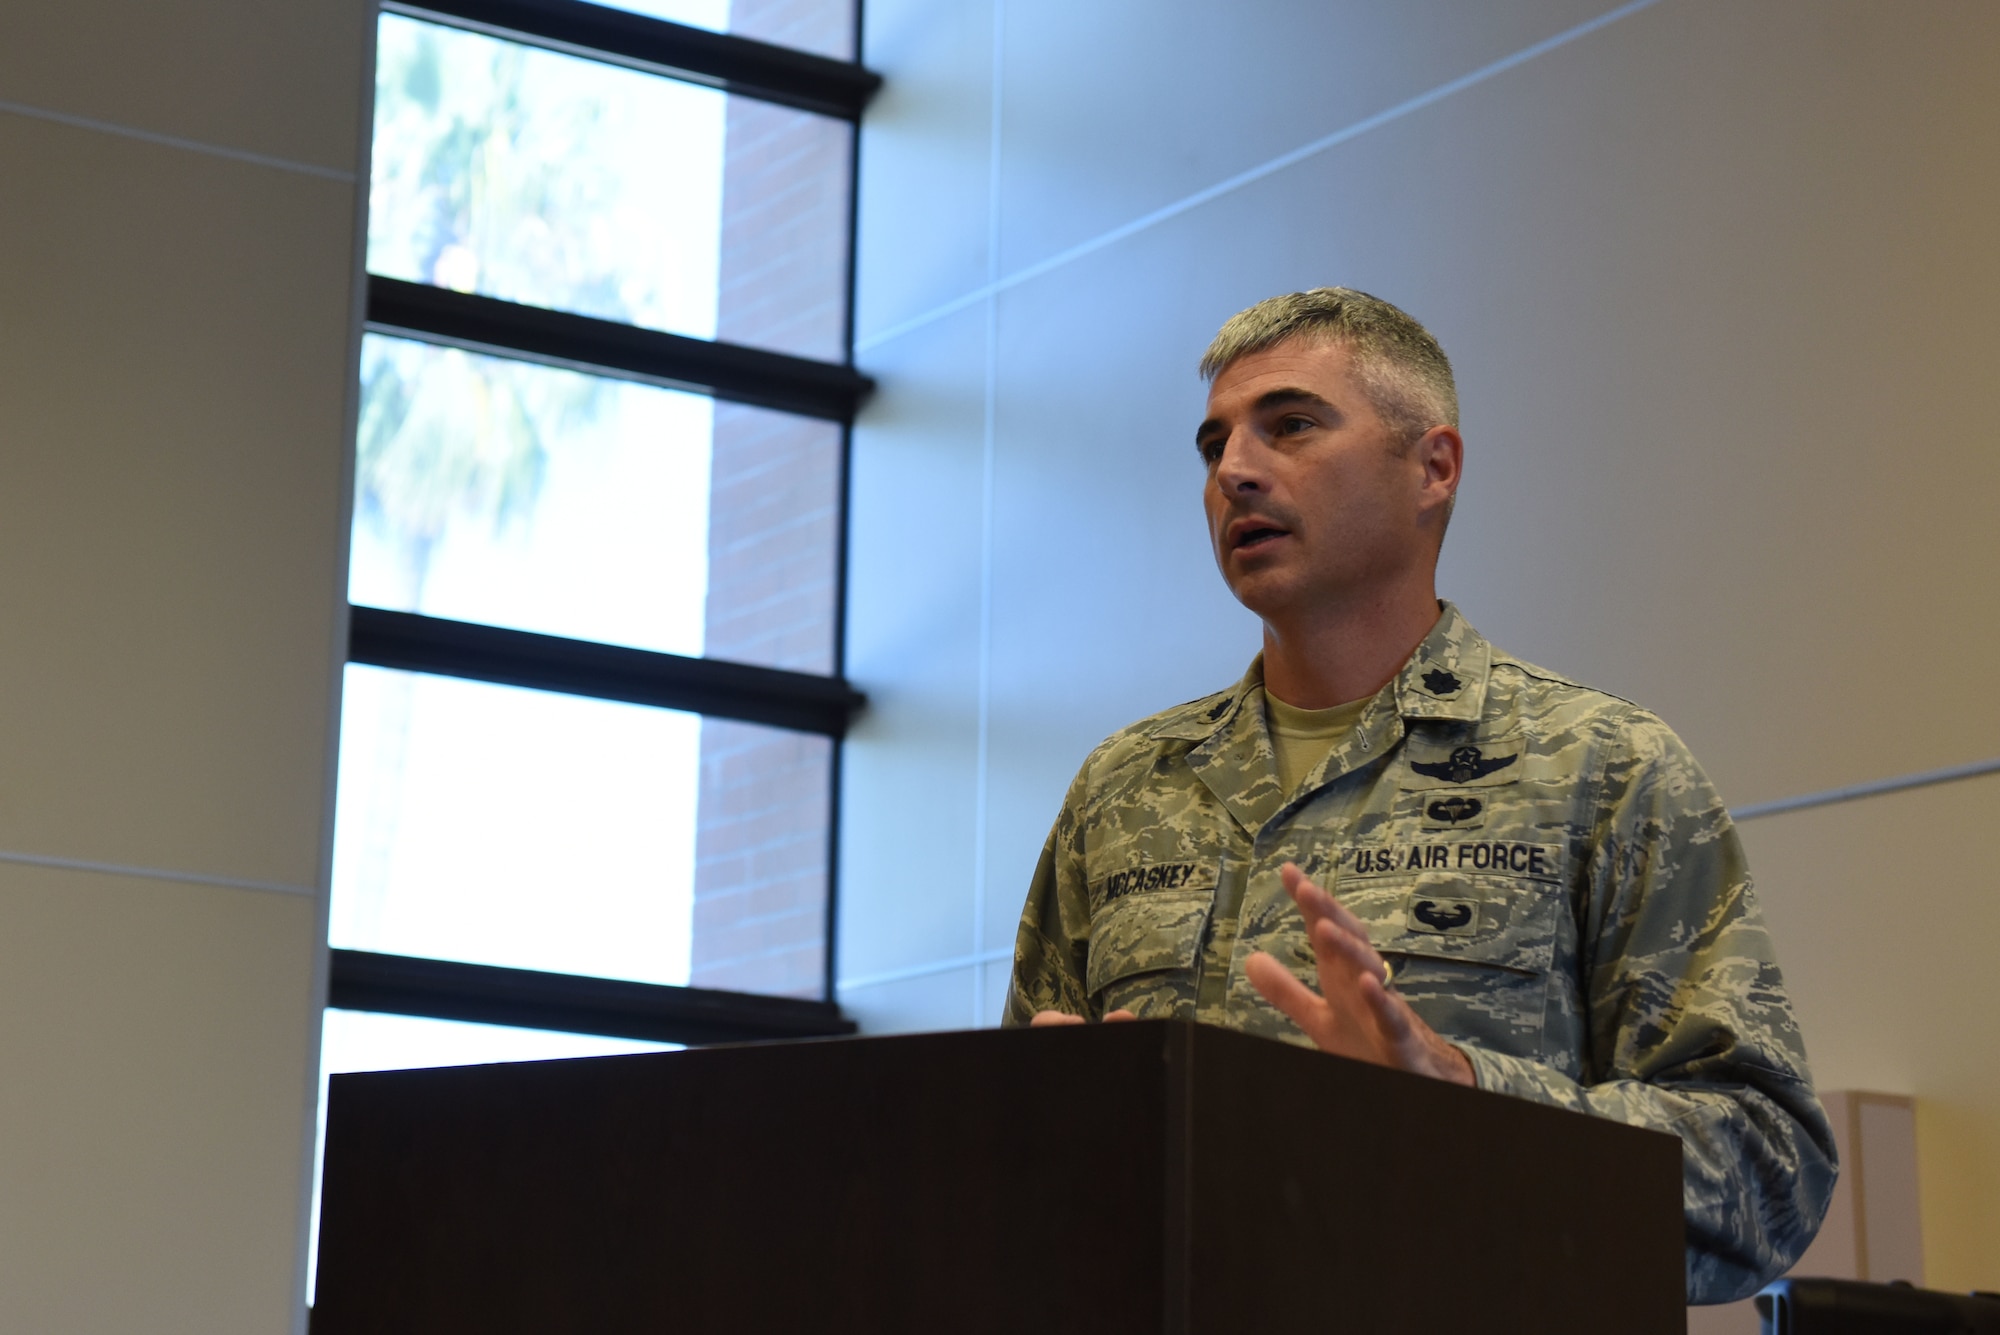 Lt. Col. Kevin K. McCaskey, 39th Operations Support Squadron commander, gives a speech during his change of command ceremony on June 6, 2019, on Incirlik Air Base, Turkey. McCaskey assumed command of the 39th OSS from Lt. Col. John A. Talafuse, and expressed his enthusiasm about leading the squadron. (U.S. Air Force photo by Senior Airman Joshua Magbanua)